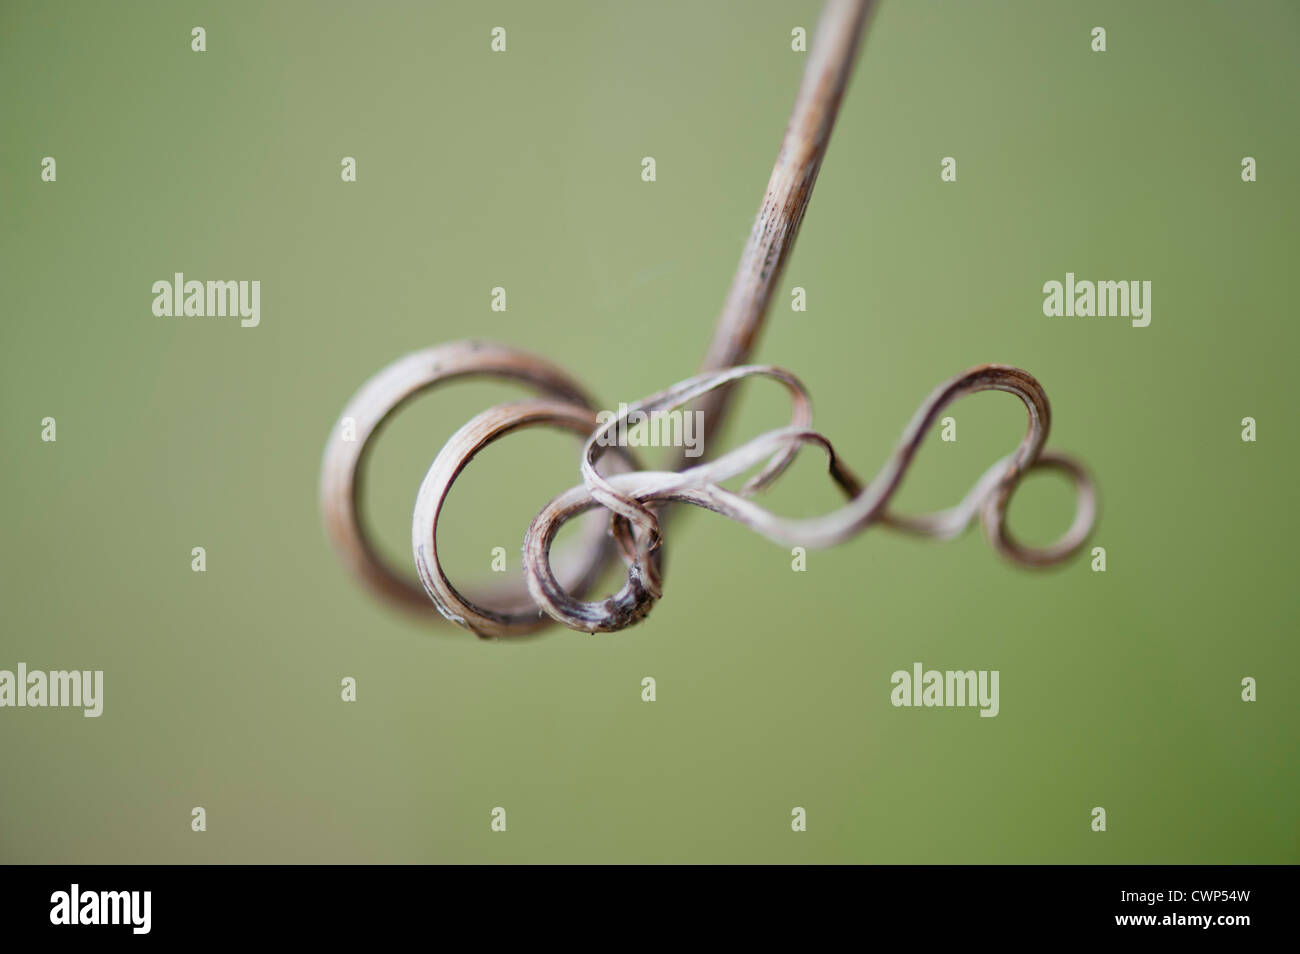 Curled vine tendril Stock Photo